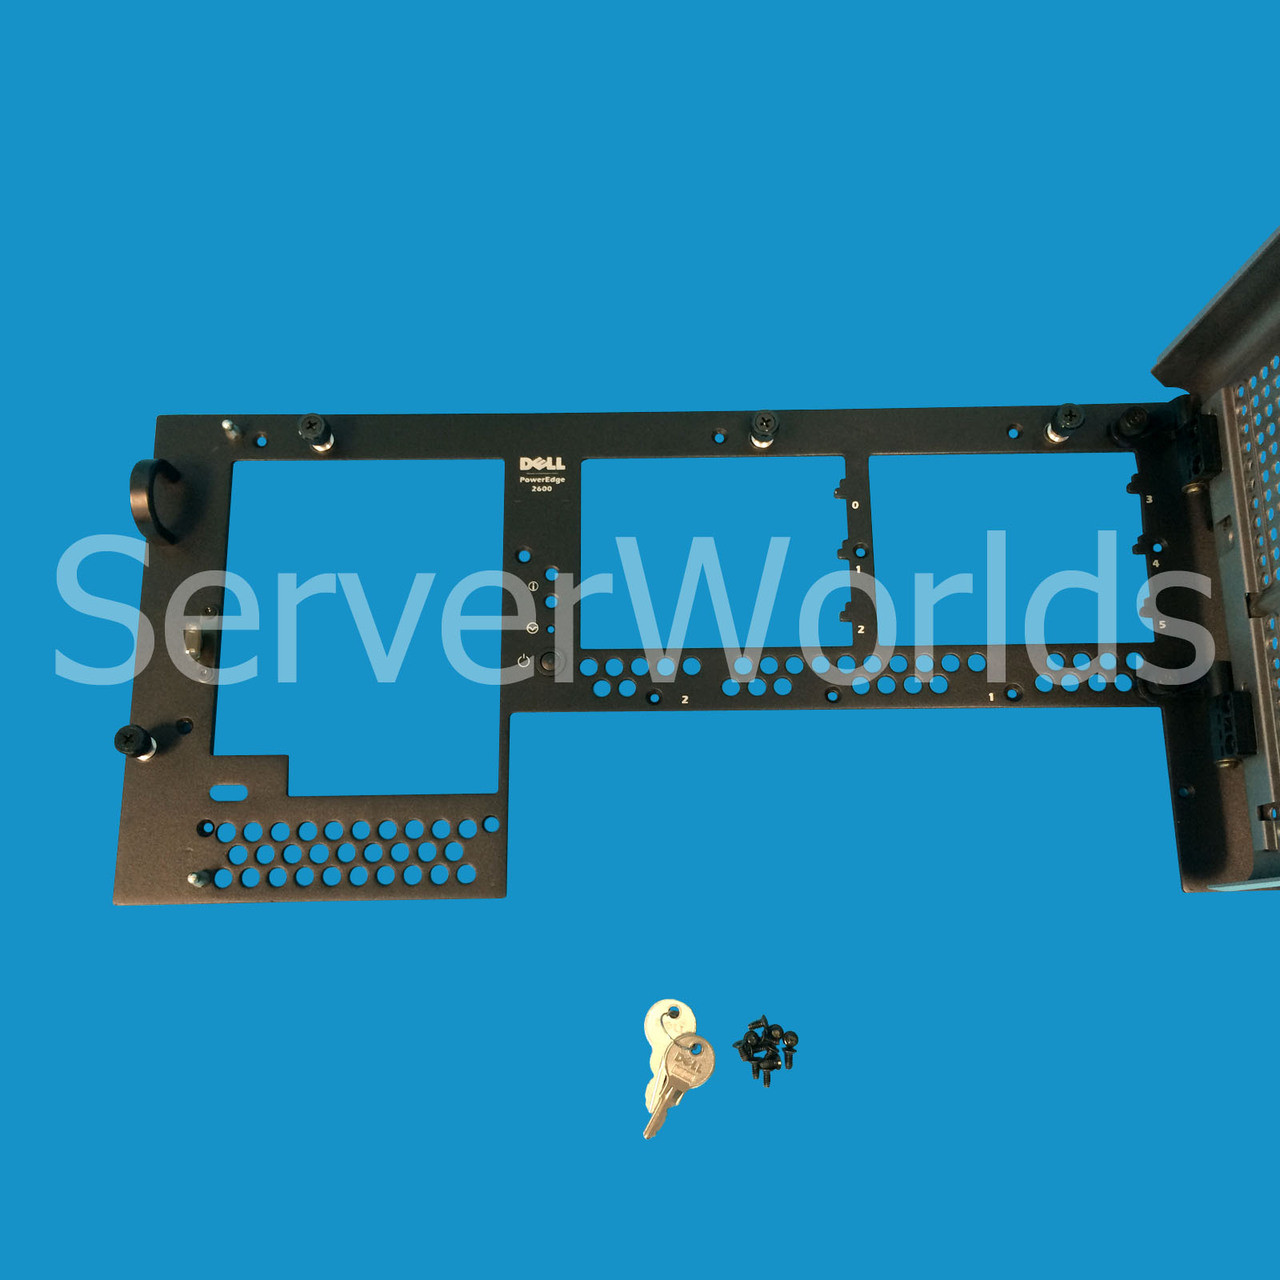 Dell 310-2799 Poweredge 2600 Partial Tower to Rack Conversion Kit